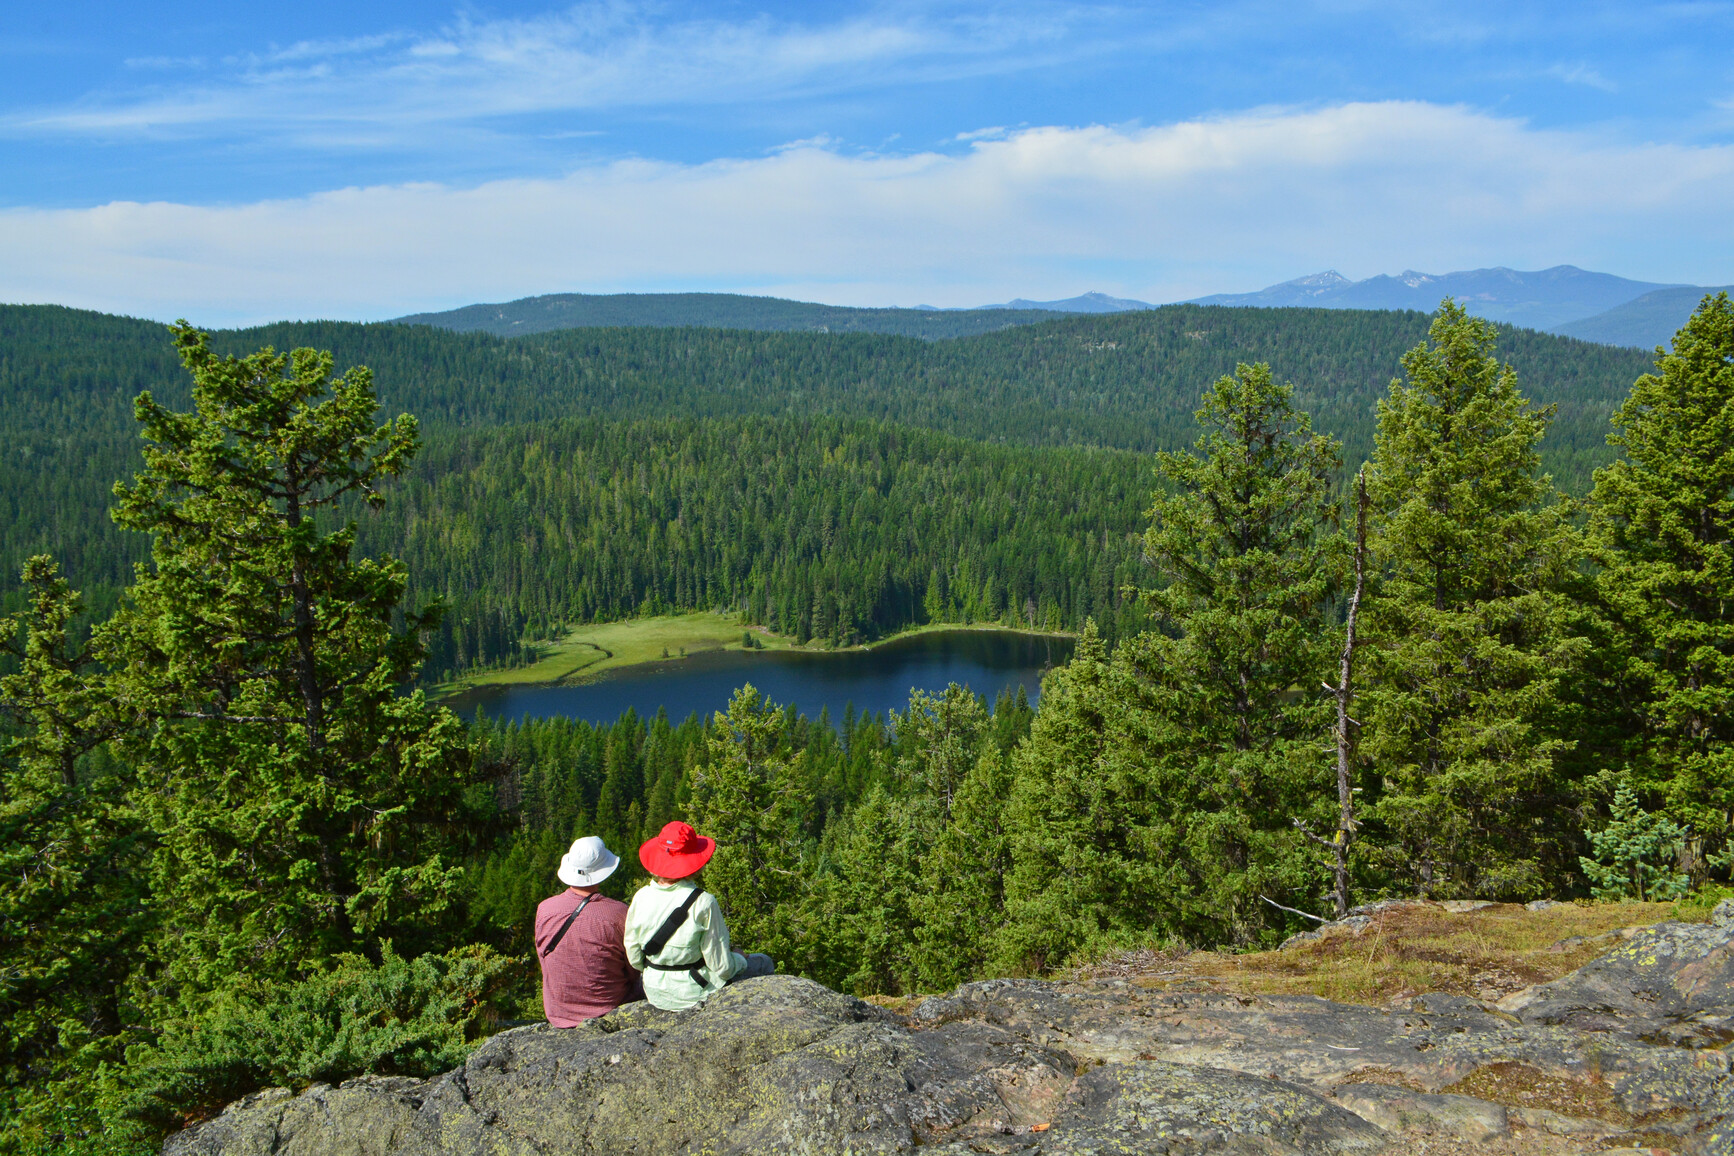 Park visitors hiking on a mountain above Champion Lakes. The lake and surrounding mountains are in view.